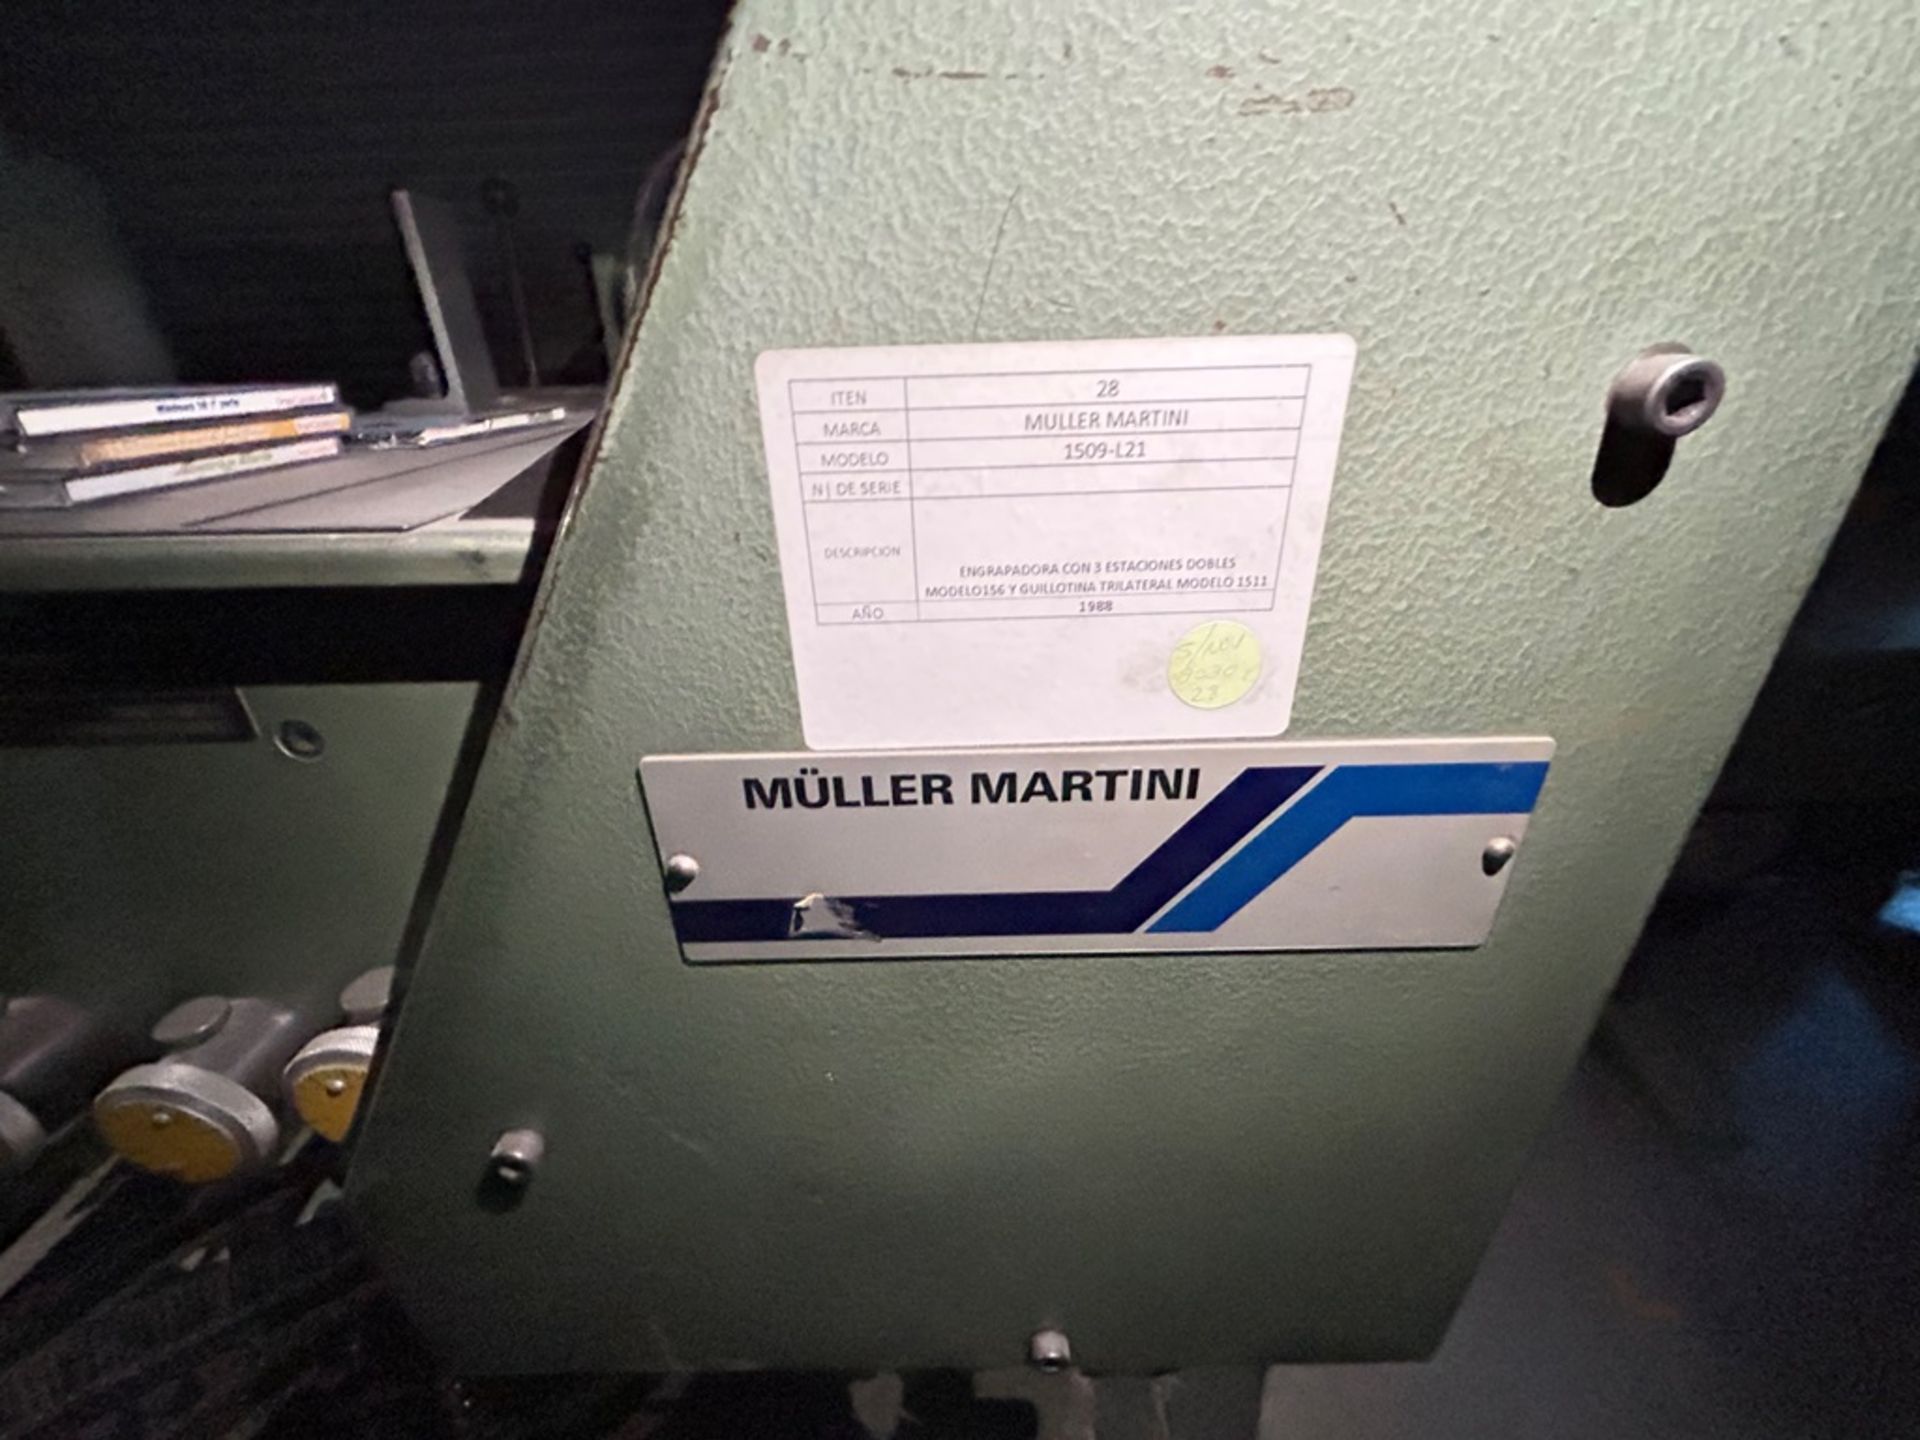 MULLER MARTINI Stapler with 3 double stations , Model 1509-L21, Serial No. SS, Year 1988, 220V, wit - Image 8 of 9